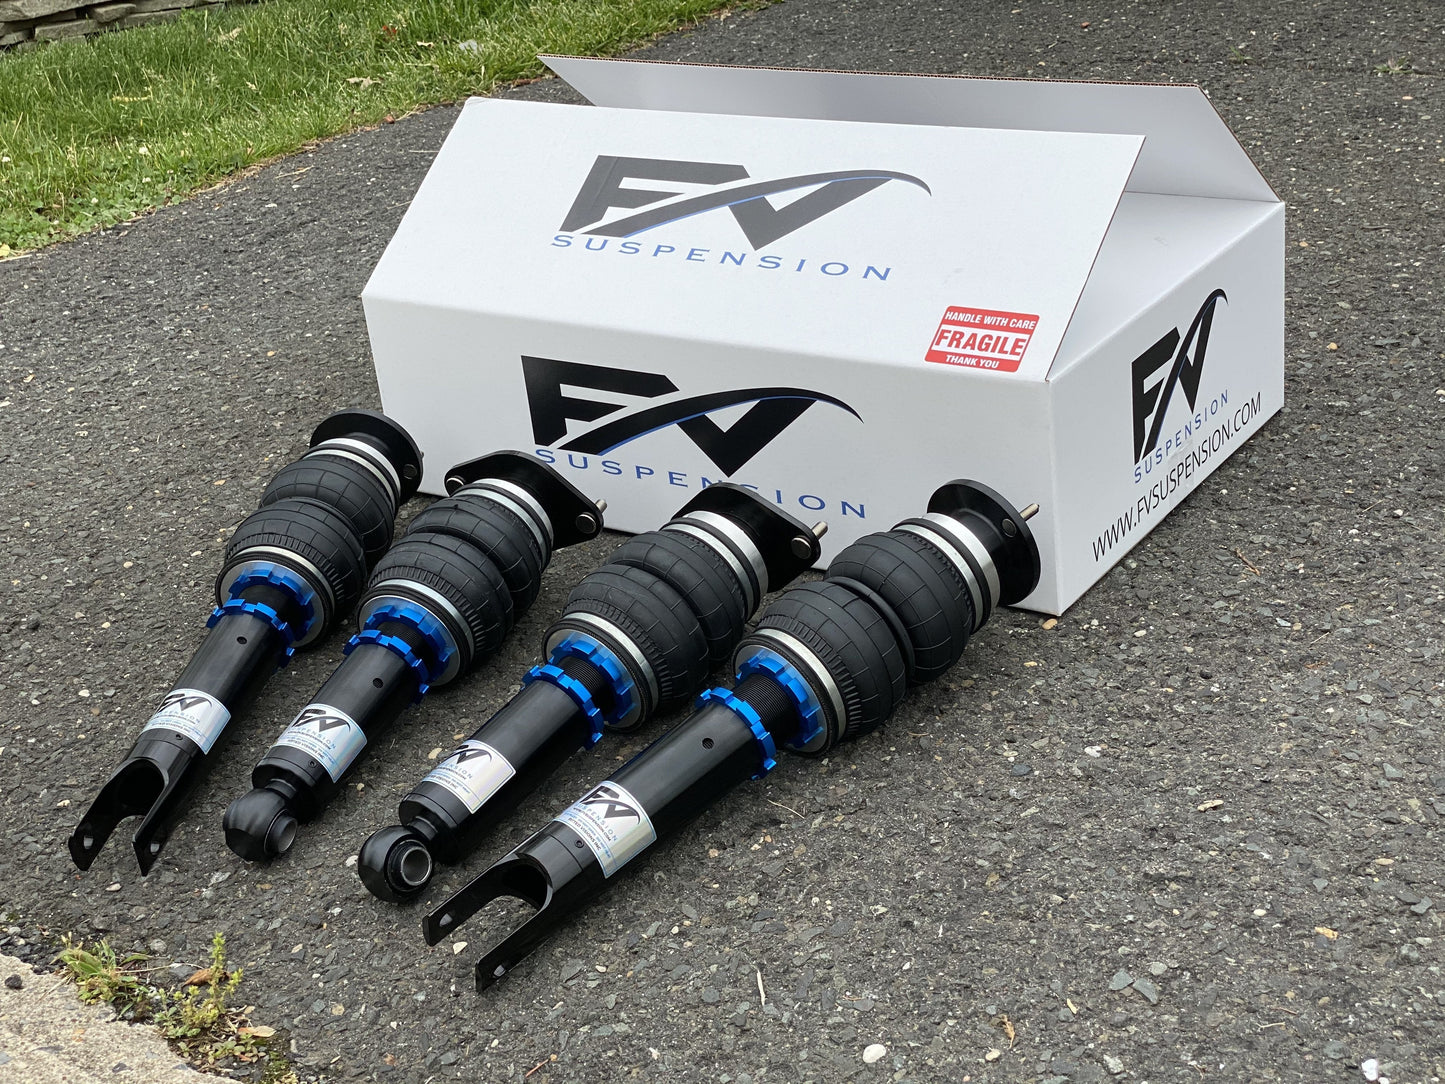 FV Suspension 3H Tier 3 Complete Air Ride kit for 06-12 Acura Rdx - Full Kit